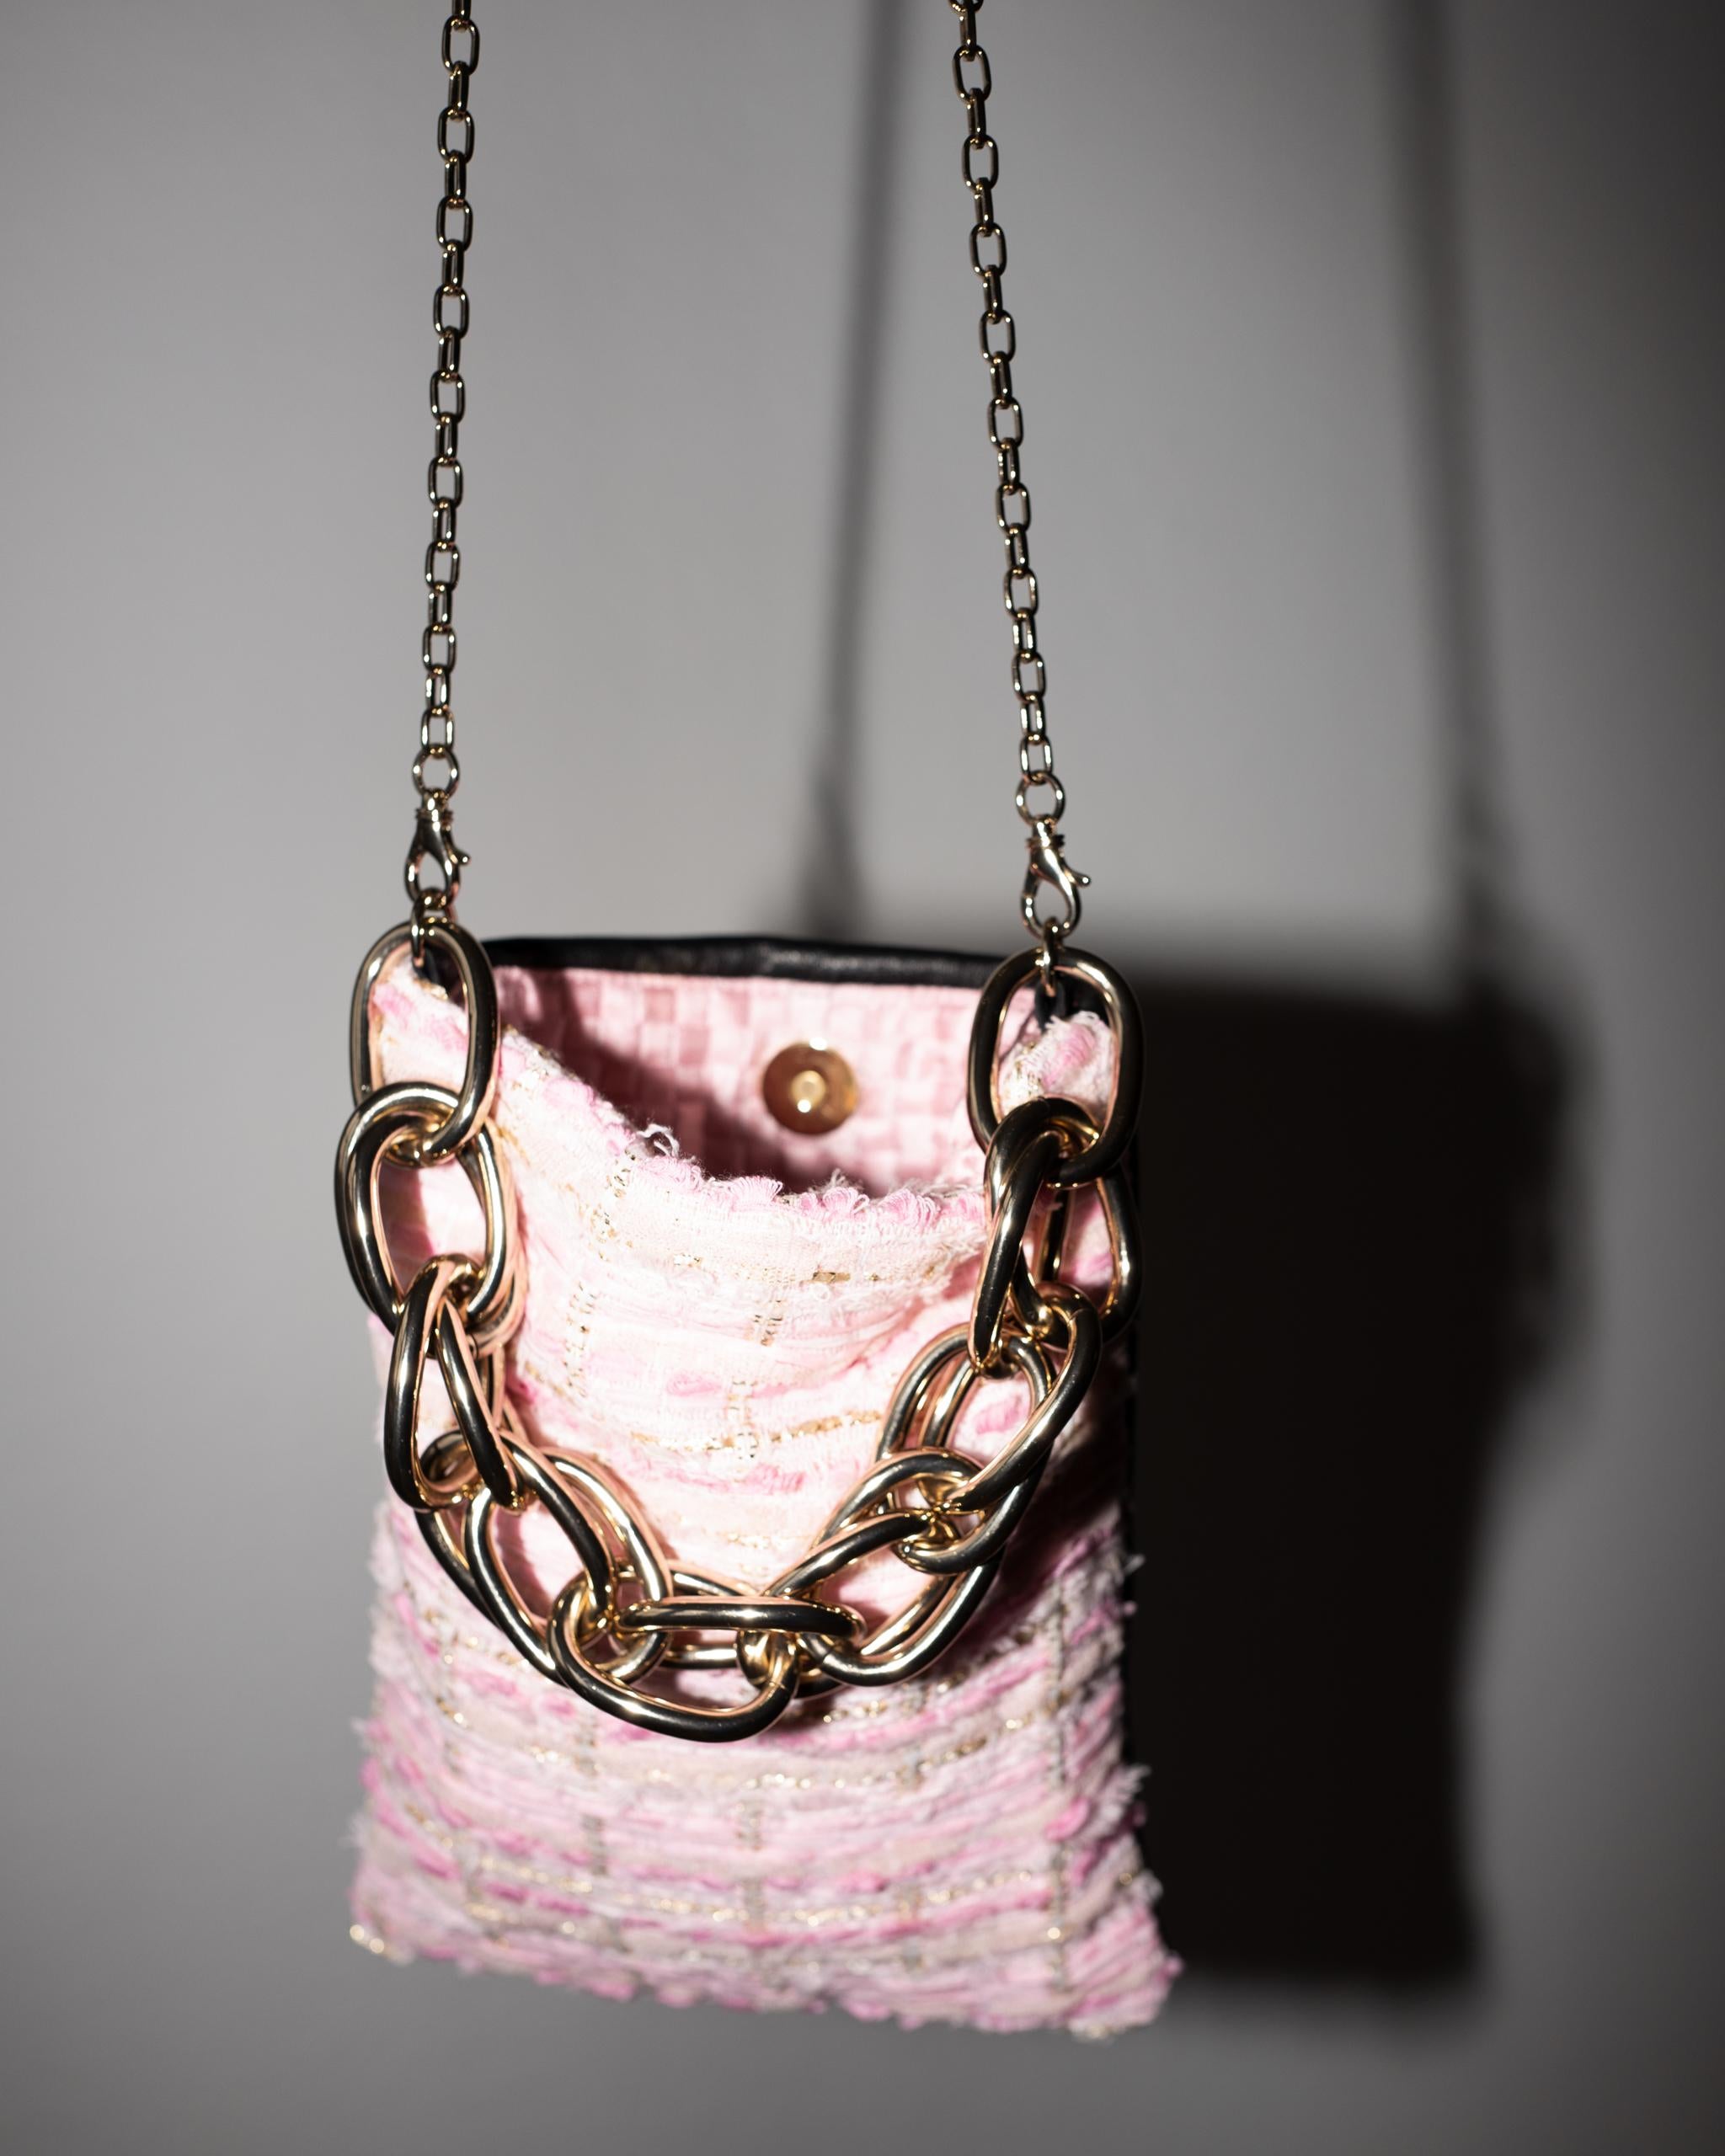 Pastel Light Pink Tweed Black Italian Napa Leather Gold Chain Shoulder Bag In New Condition For Sale In Los Angeles, CA